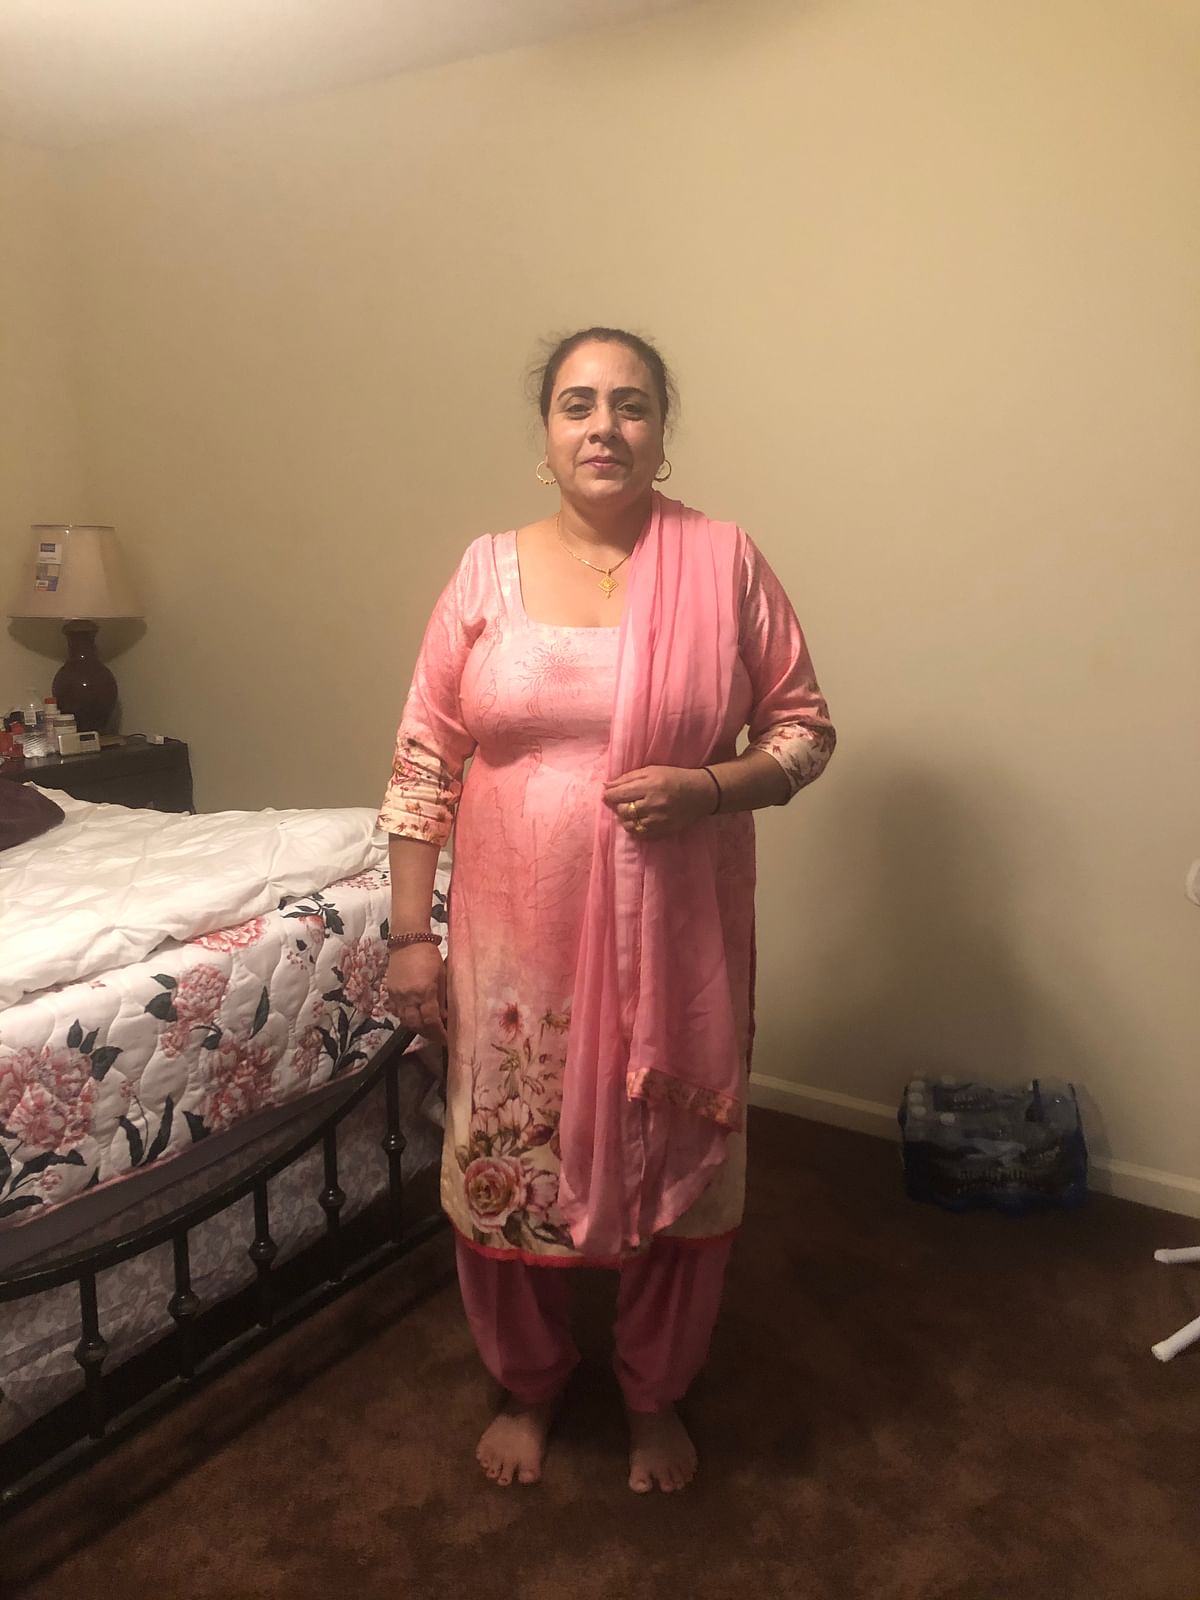 Lakhwinder Kaur narrowly escaped the bullets fired at Indianapolis’s FedEx Center on the night of 15 April. 